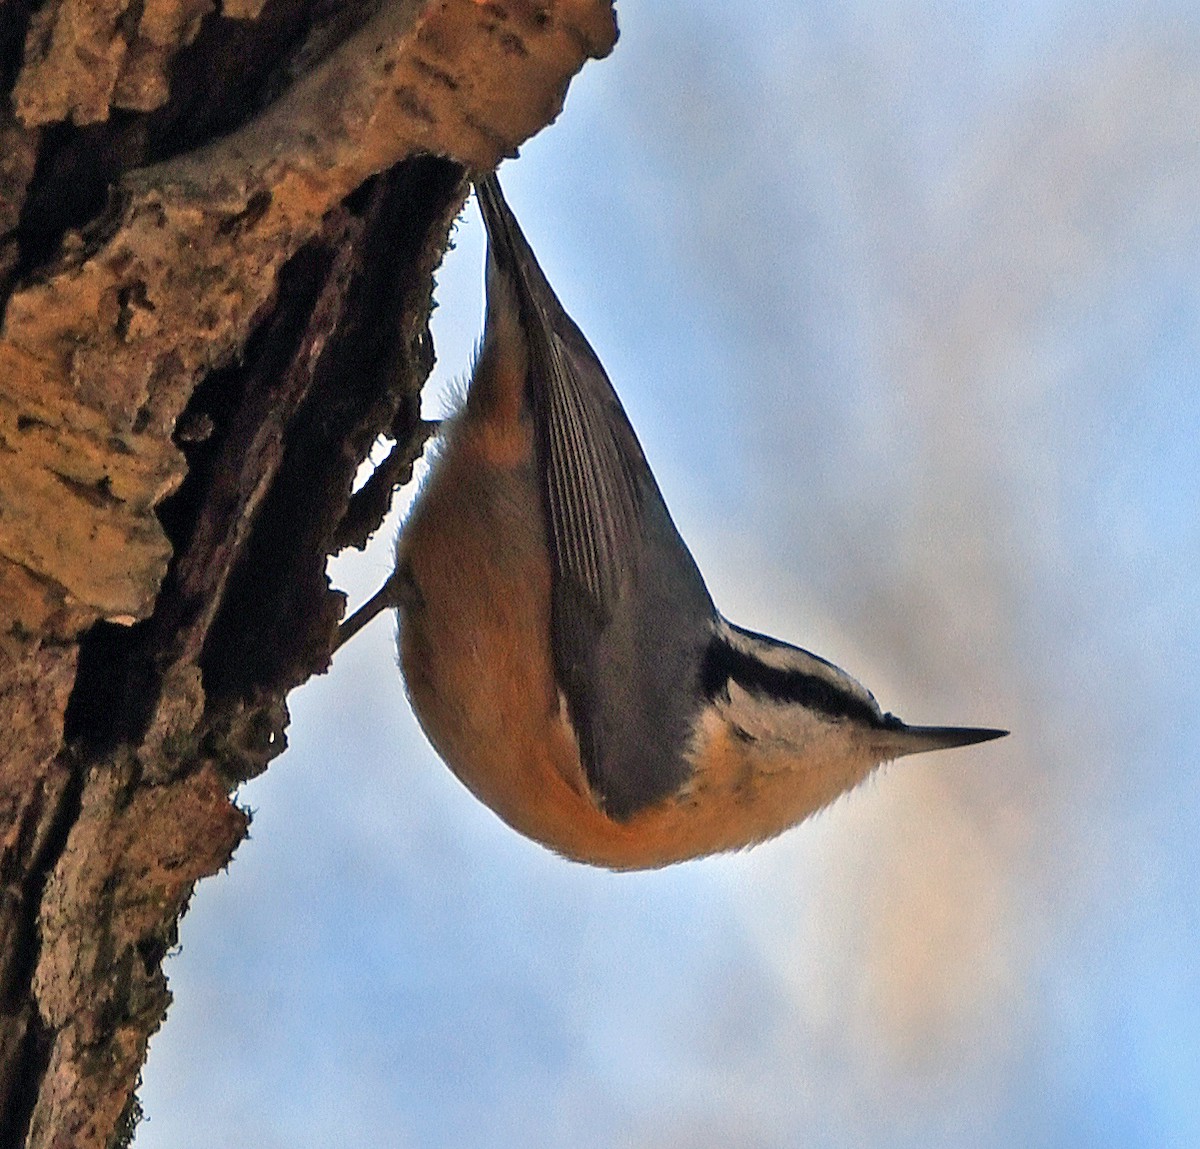 Red-breasted Nuthatch - Connie Galey